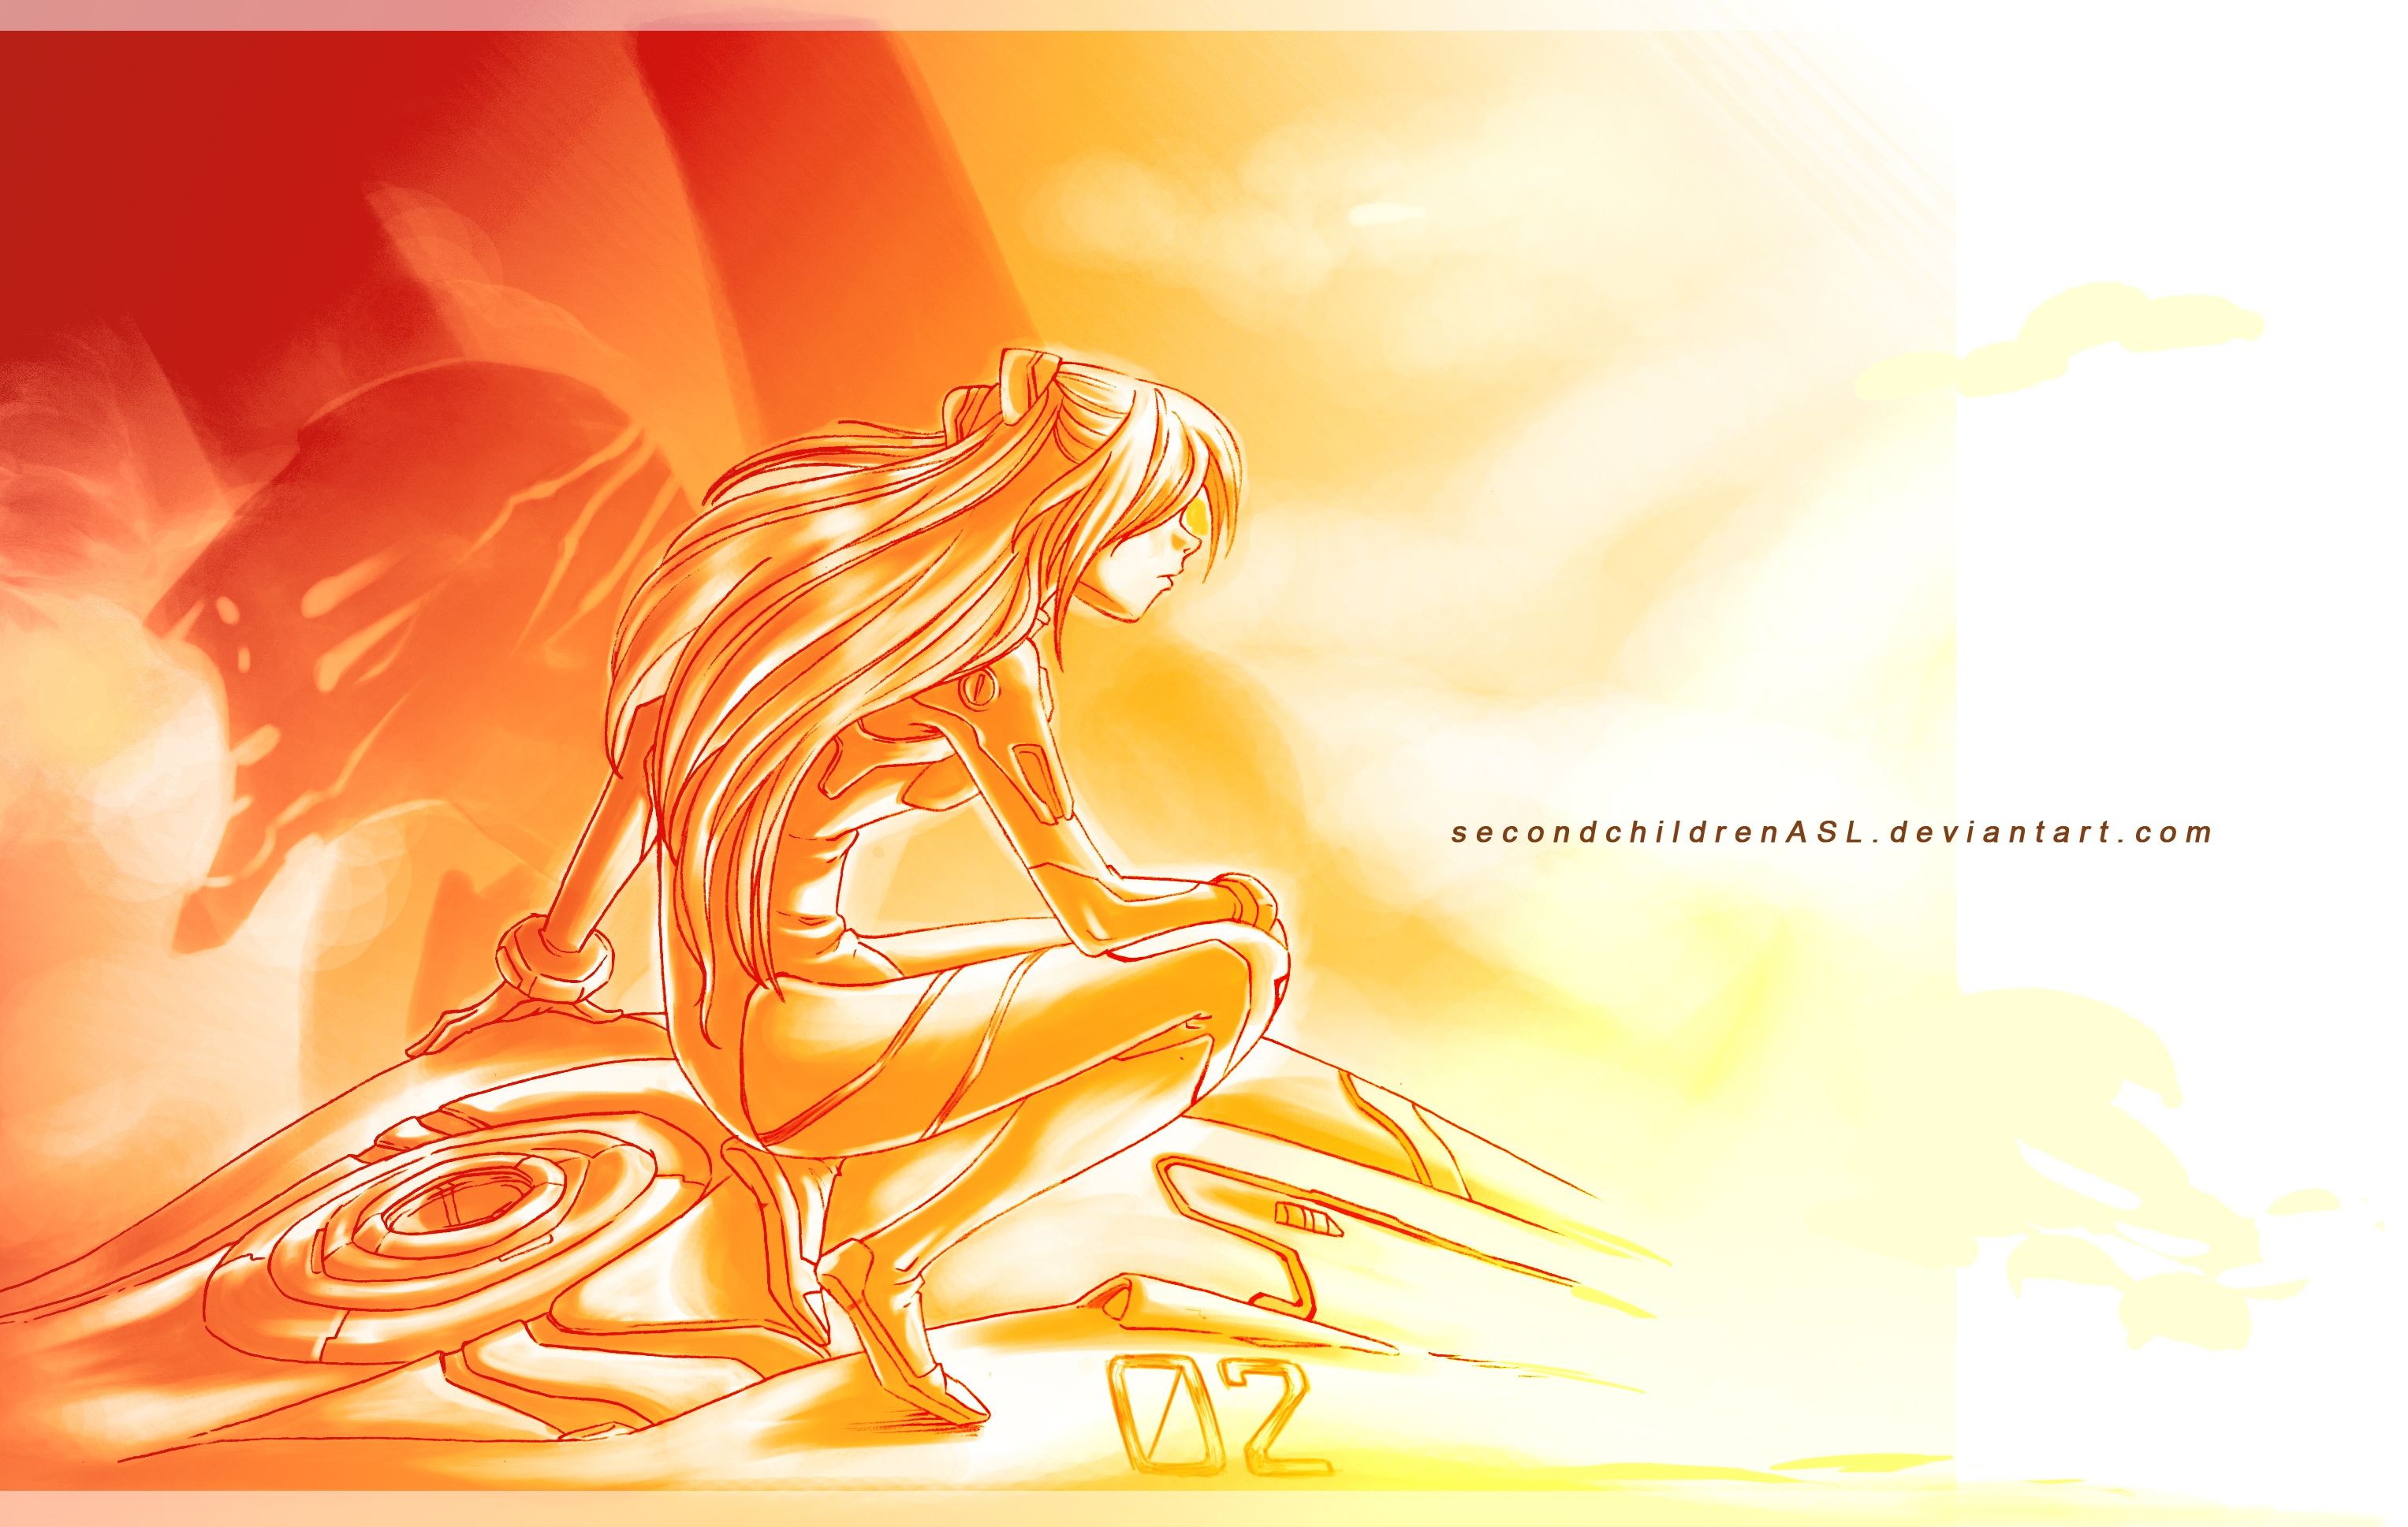 asuka___when_the_world_ends_by_secondchildrenasl-d5ai4iw.jpg